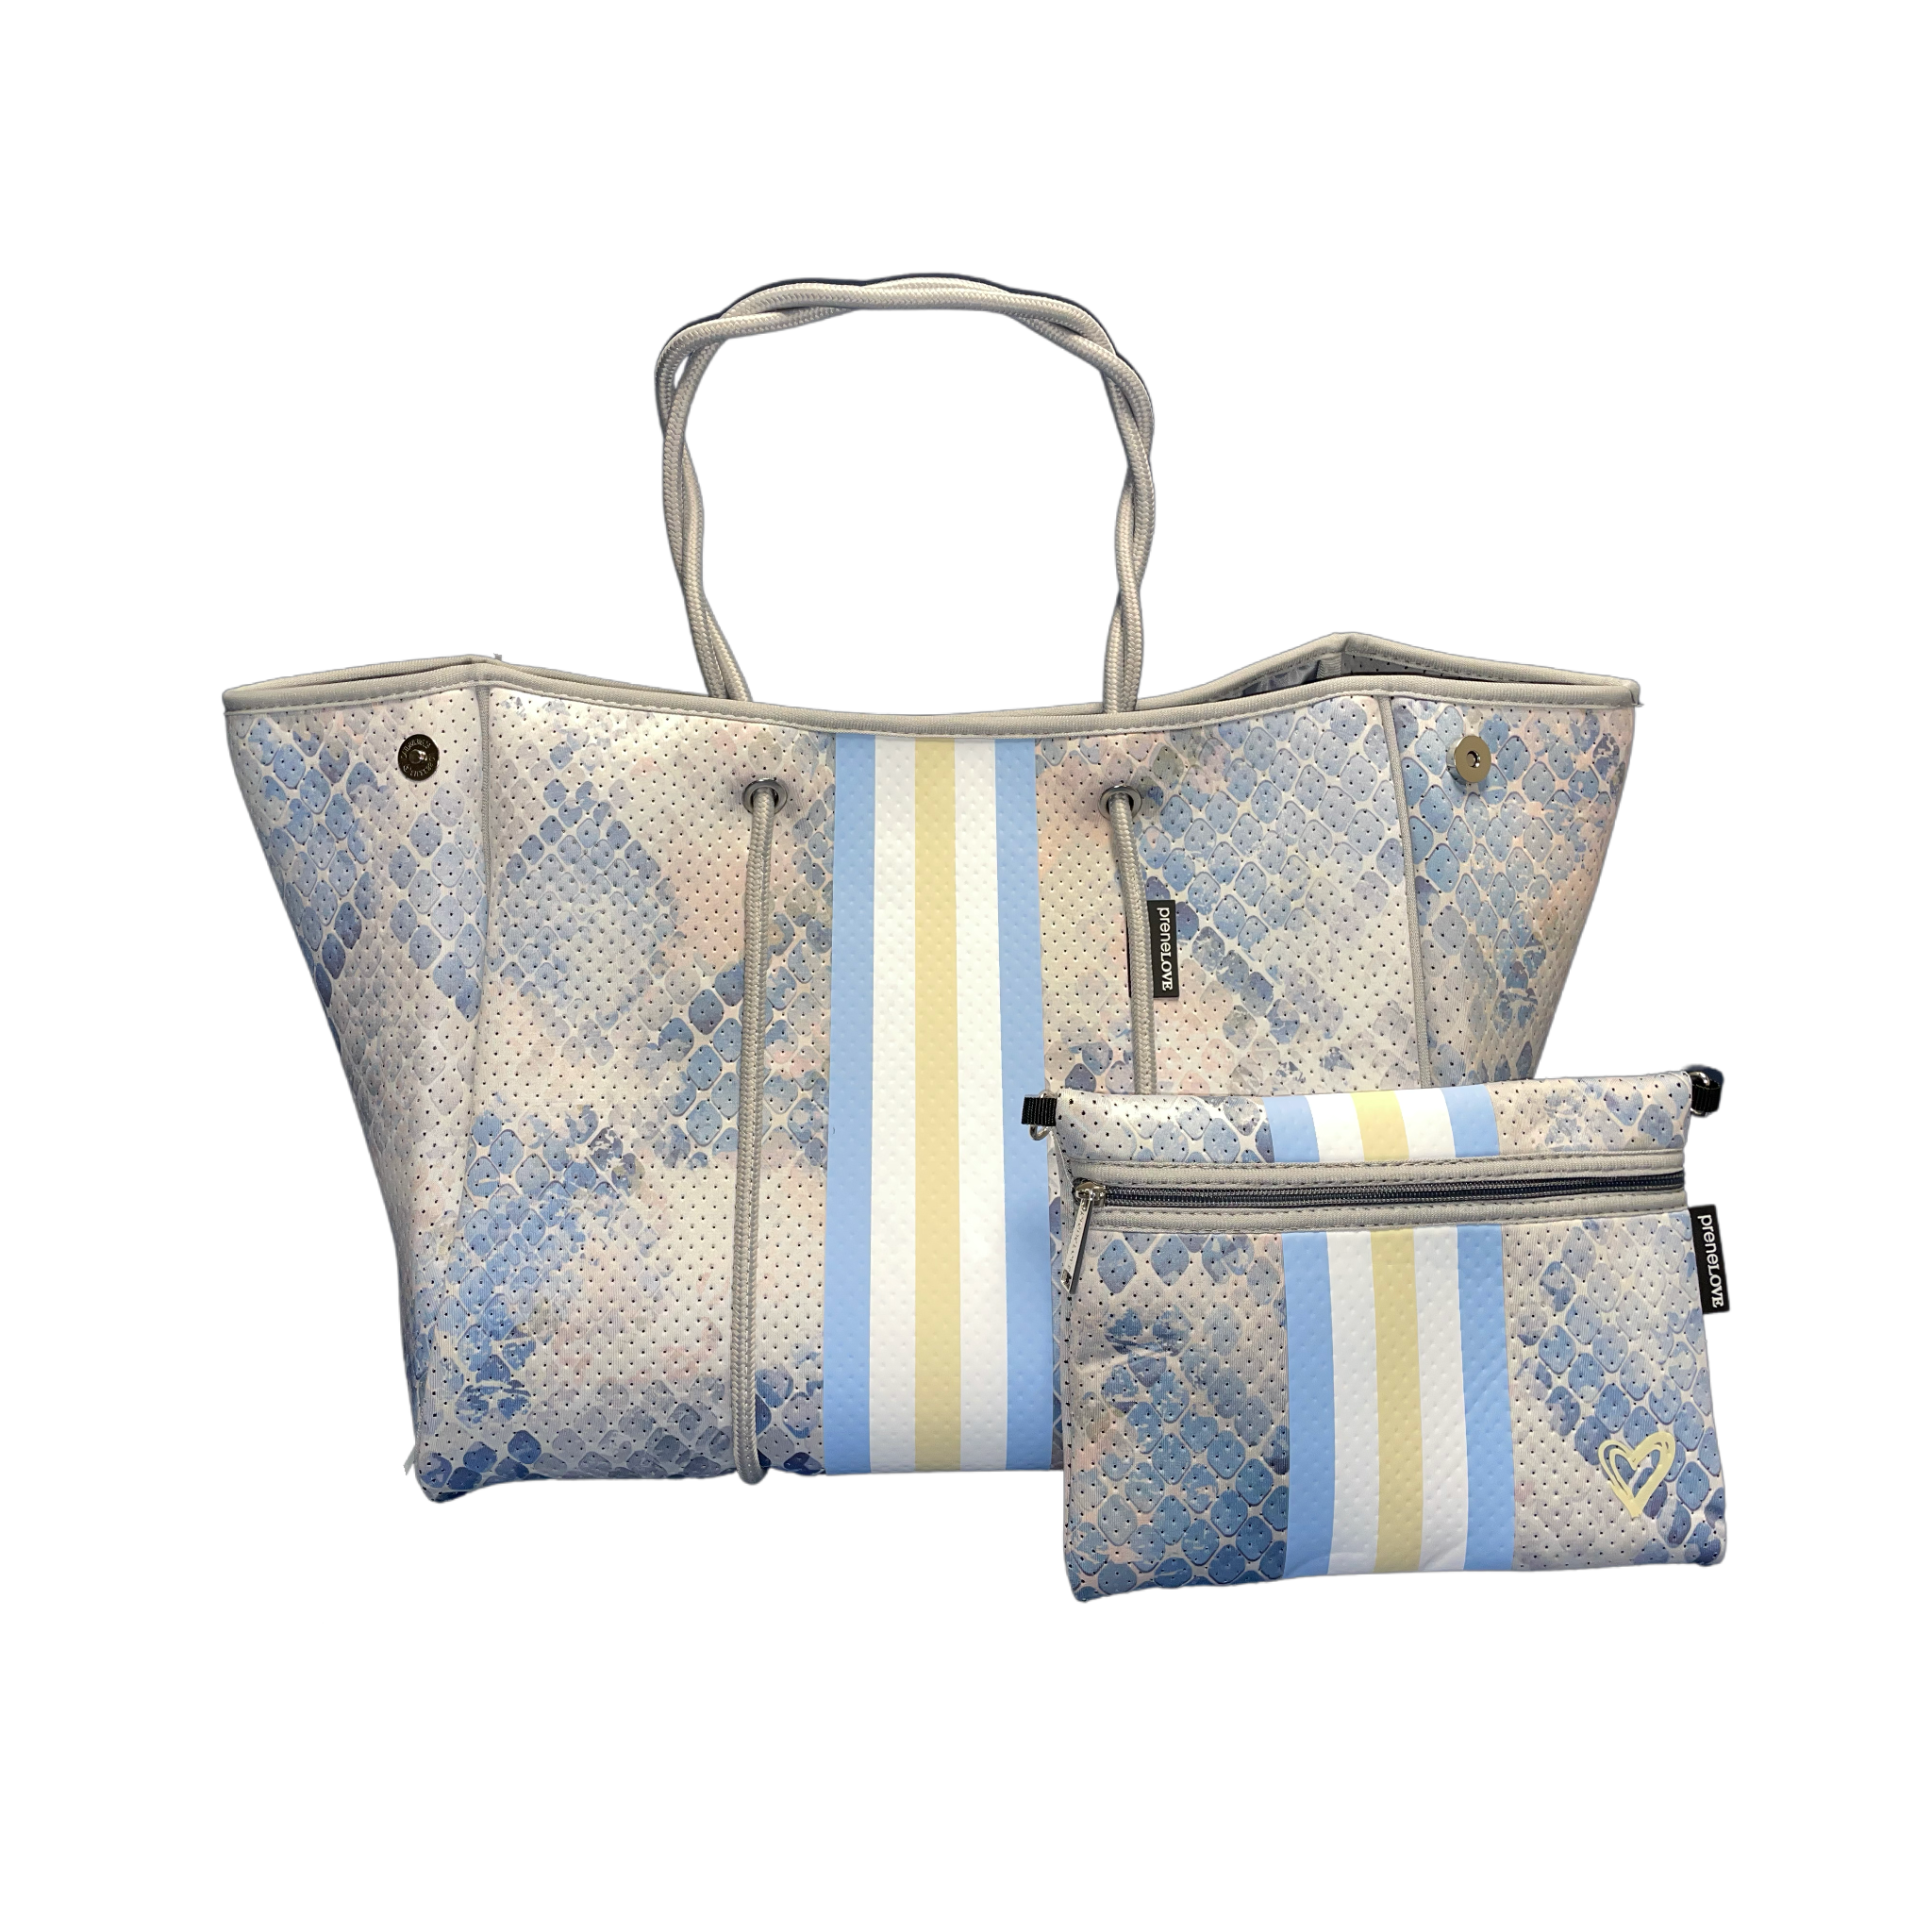 PreneLove tote bag and wristlet in Georgina. Pastel blue snake print with stripe down the center